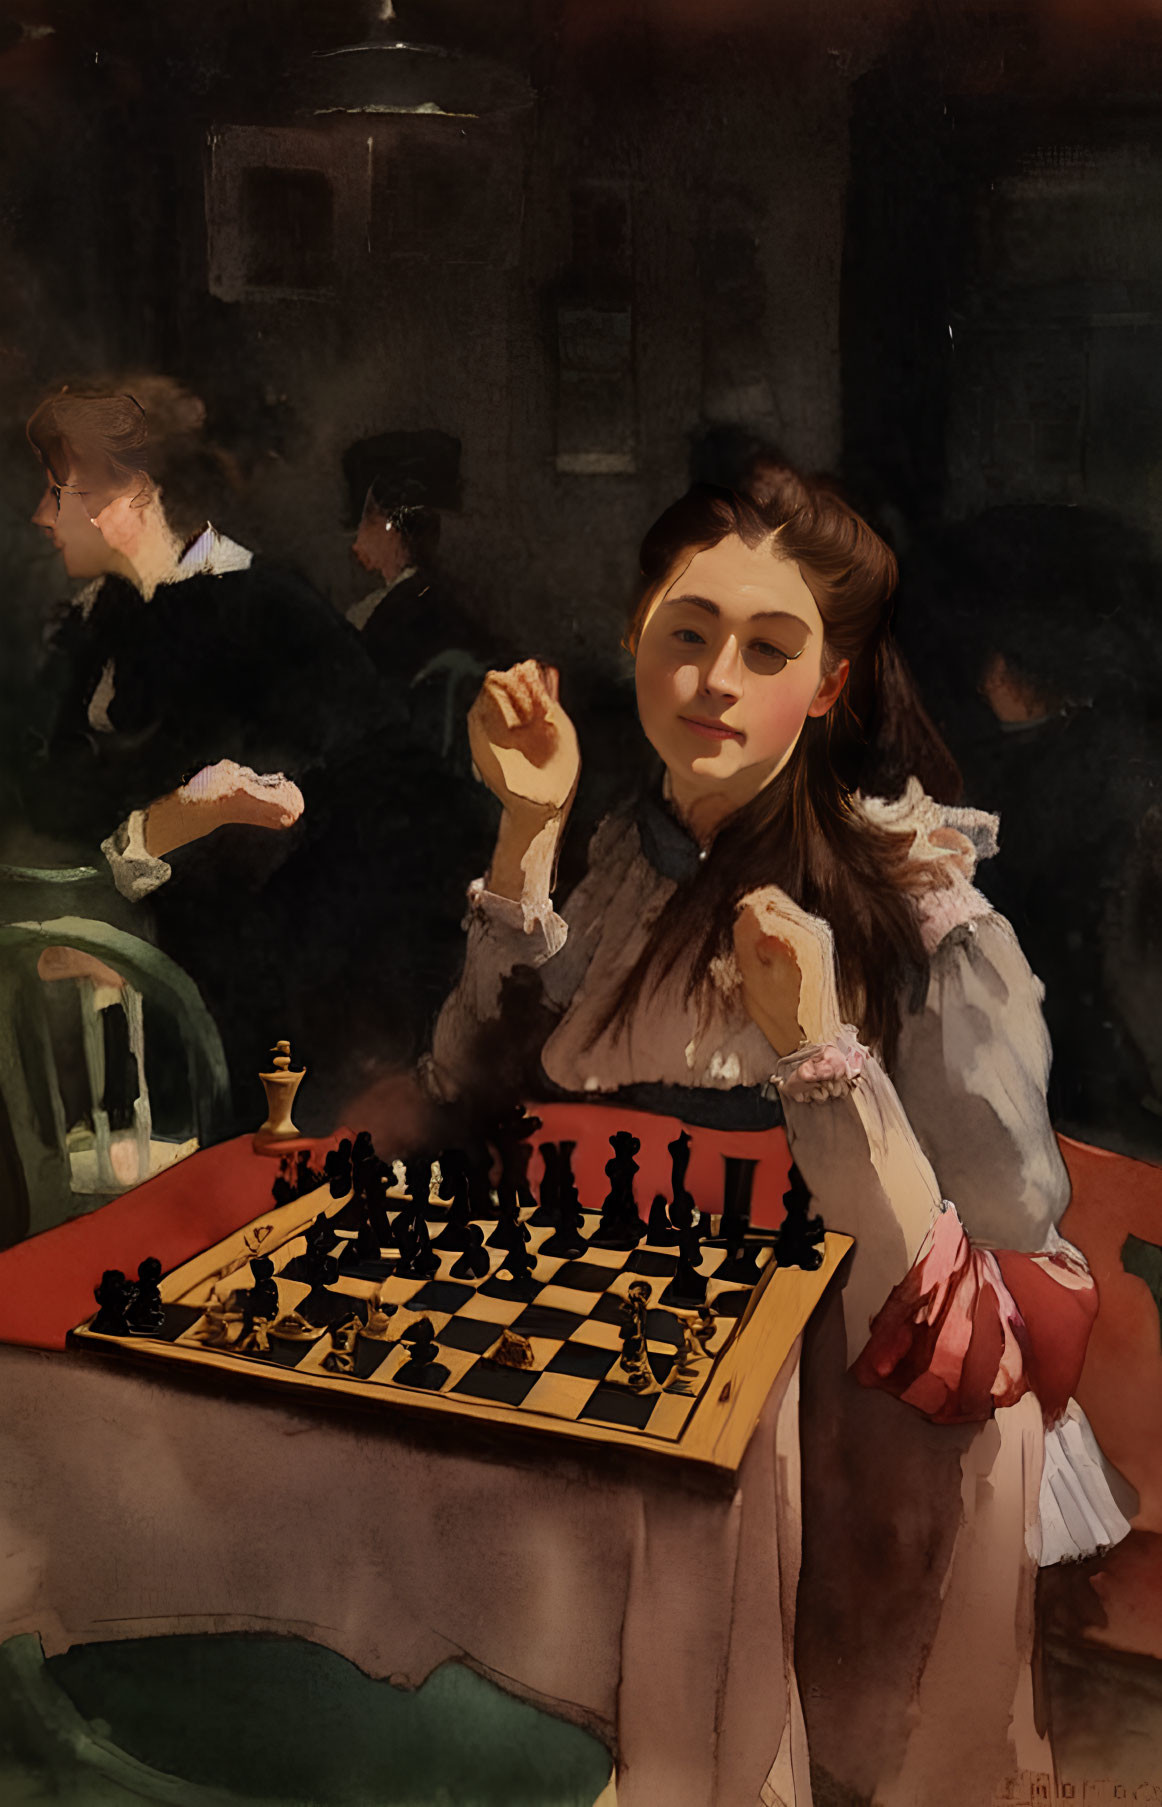 Young woman in dimly lit room at chessboard with opponent